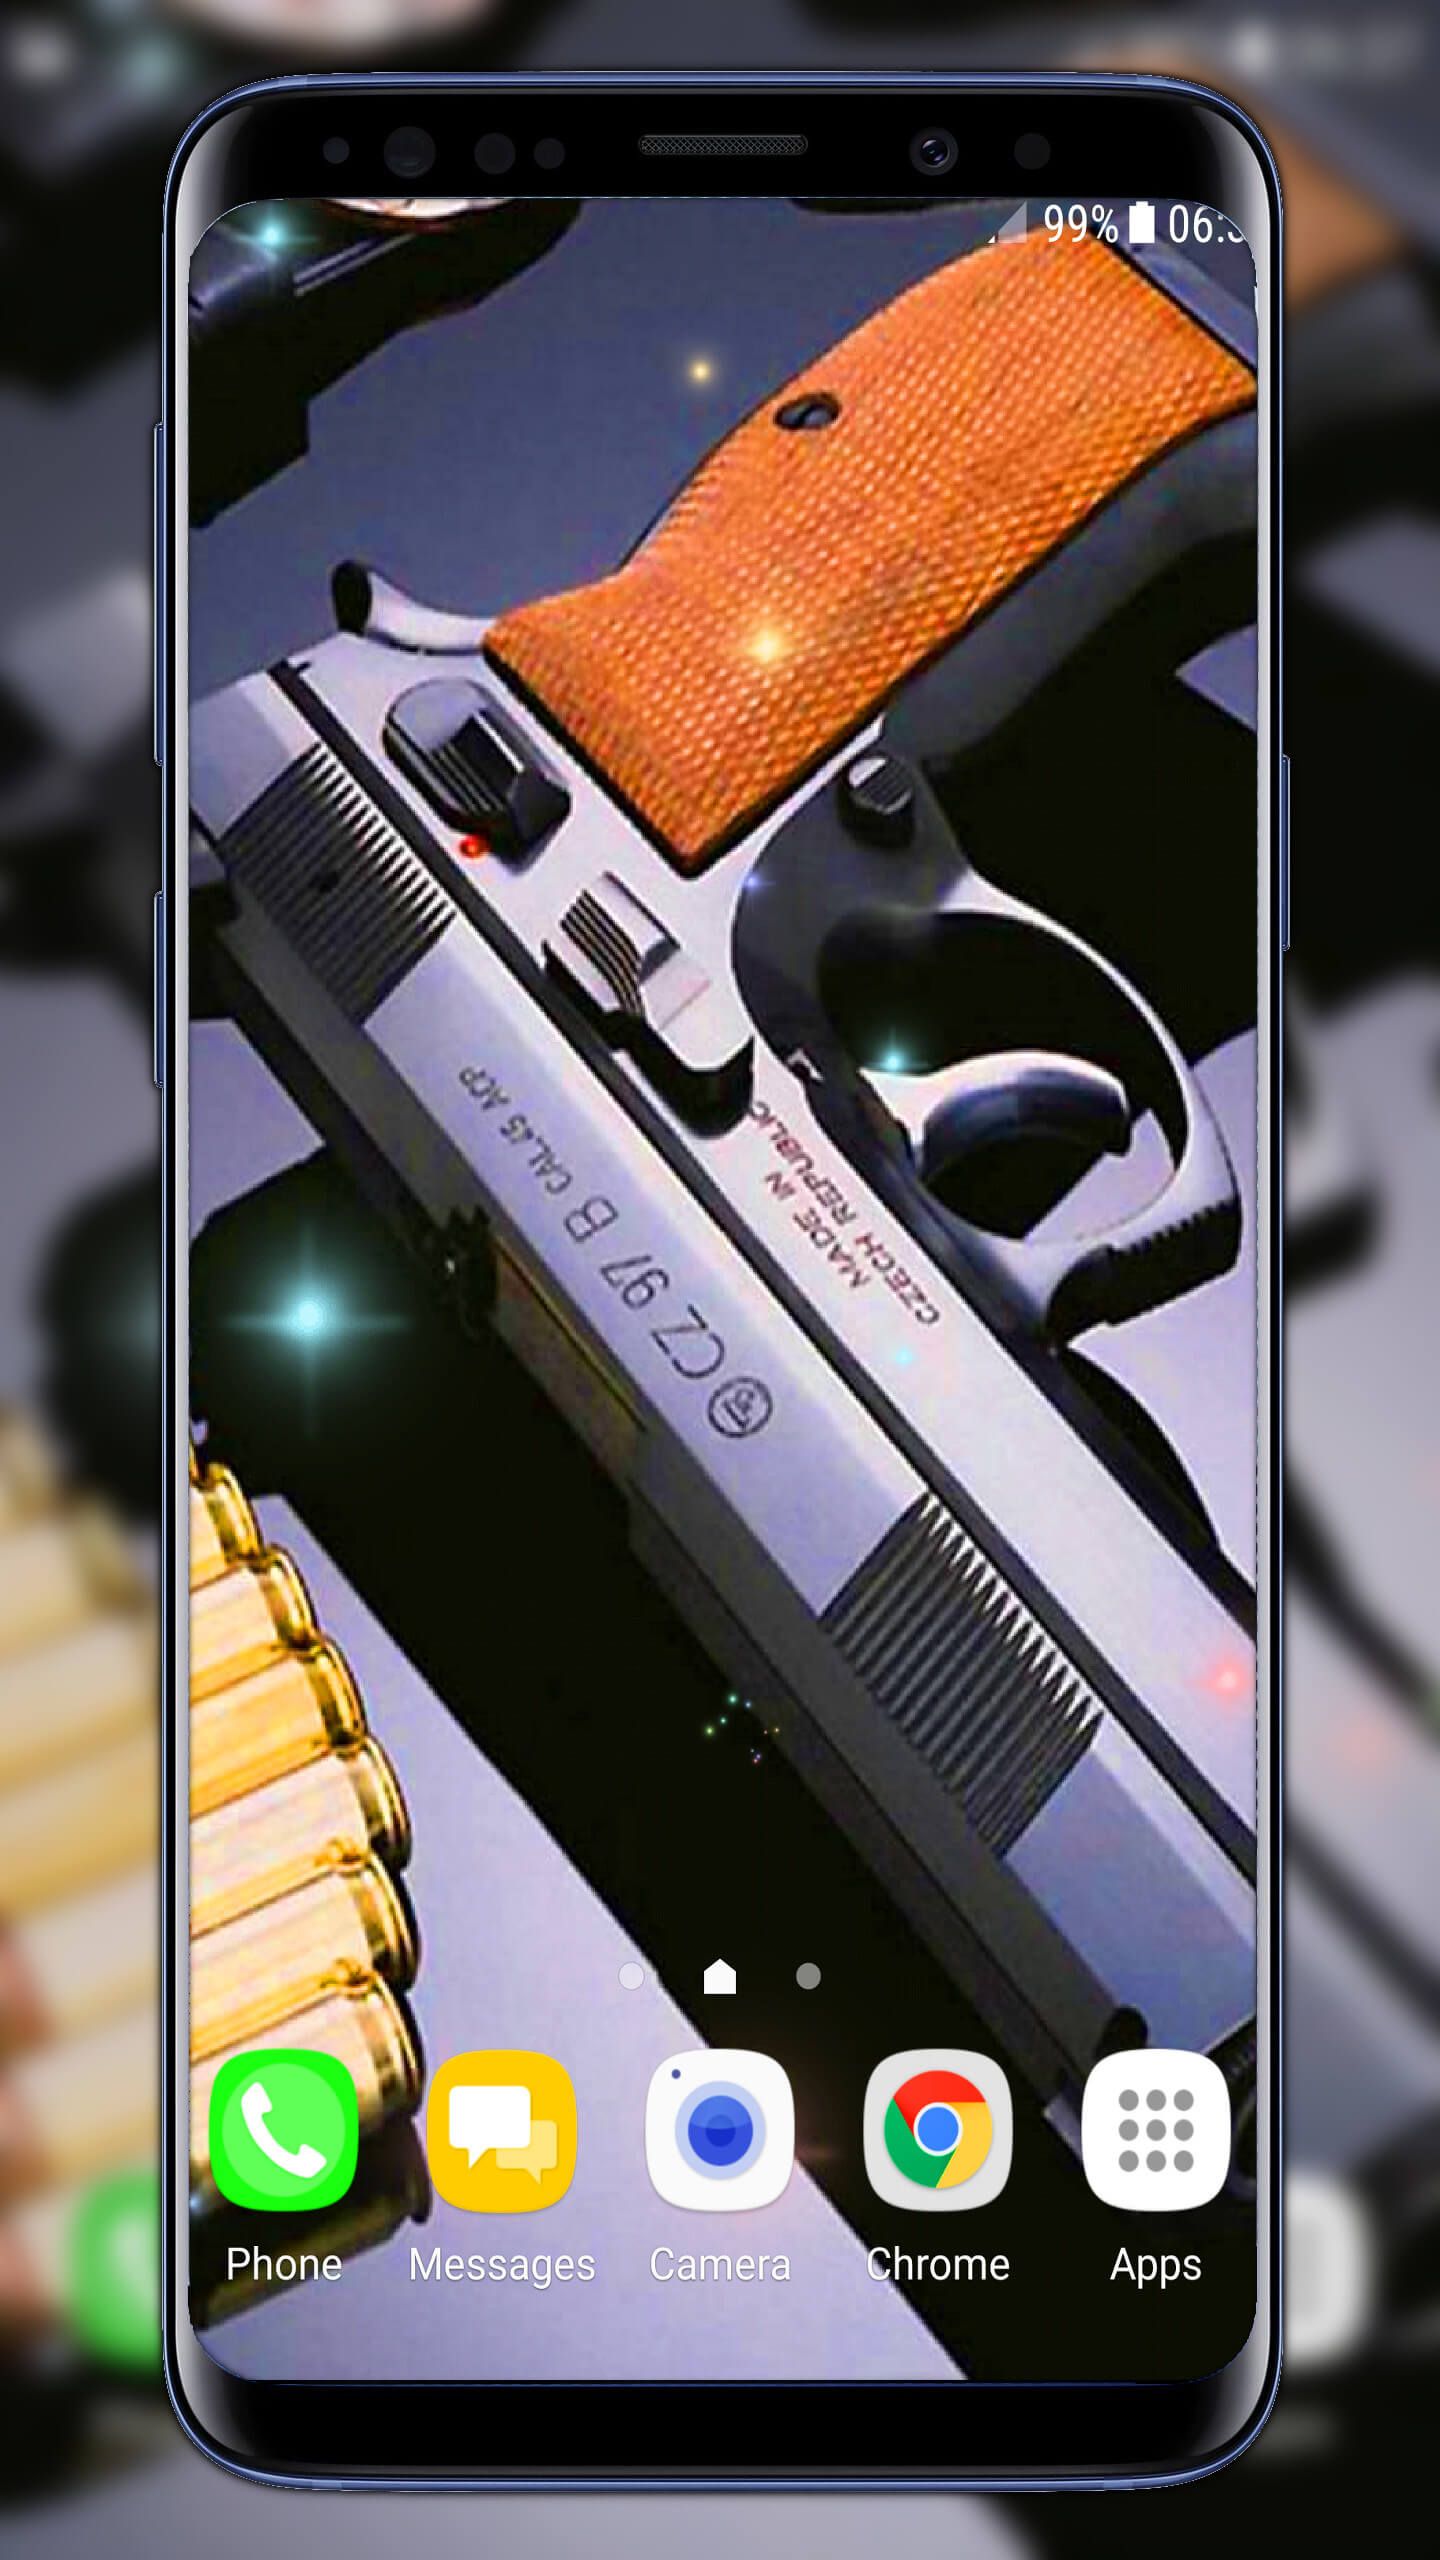 Only Thing That Stops A Bad Guy With A Gun Is A Good - HD Wallpaper 